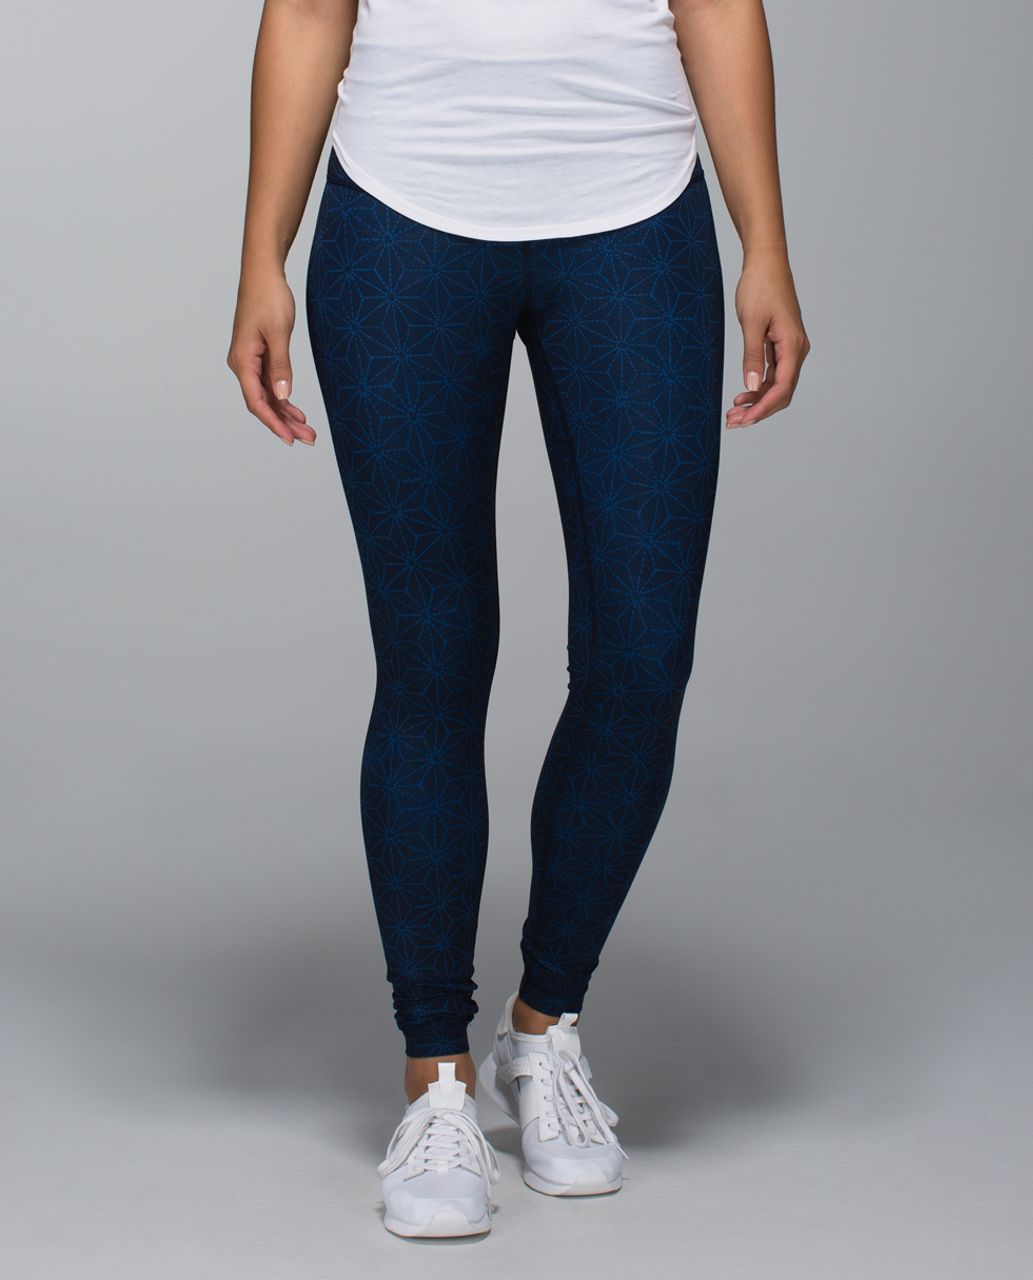 Review: Lululemon Hero Blue Inspire Tights + Om Pants - Agent Athletica